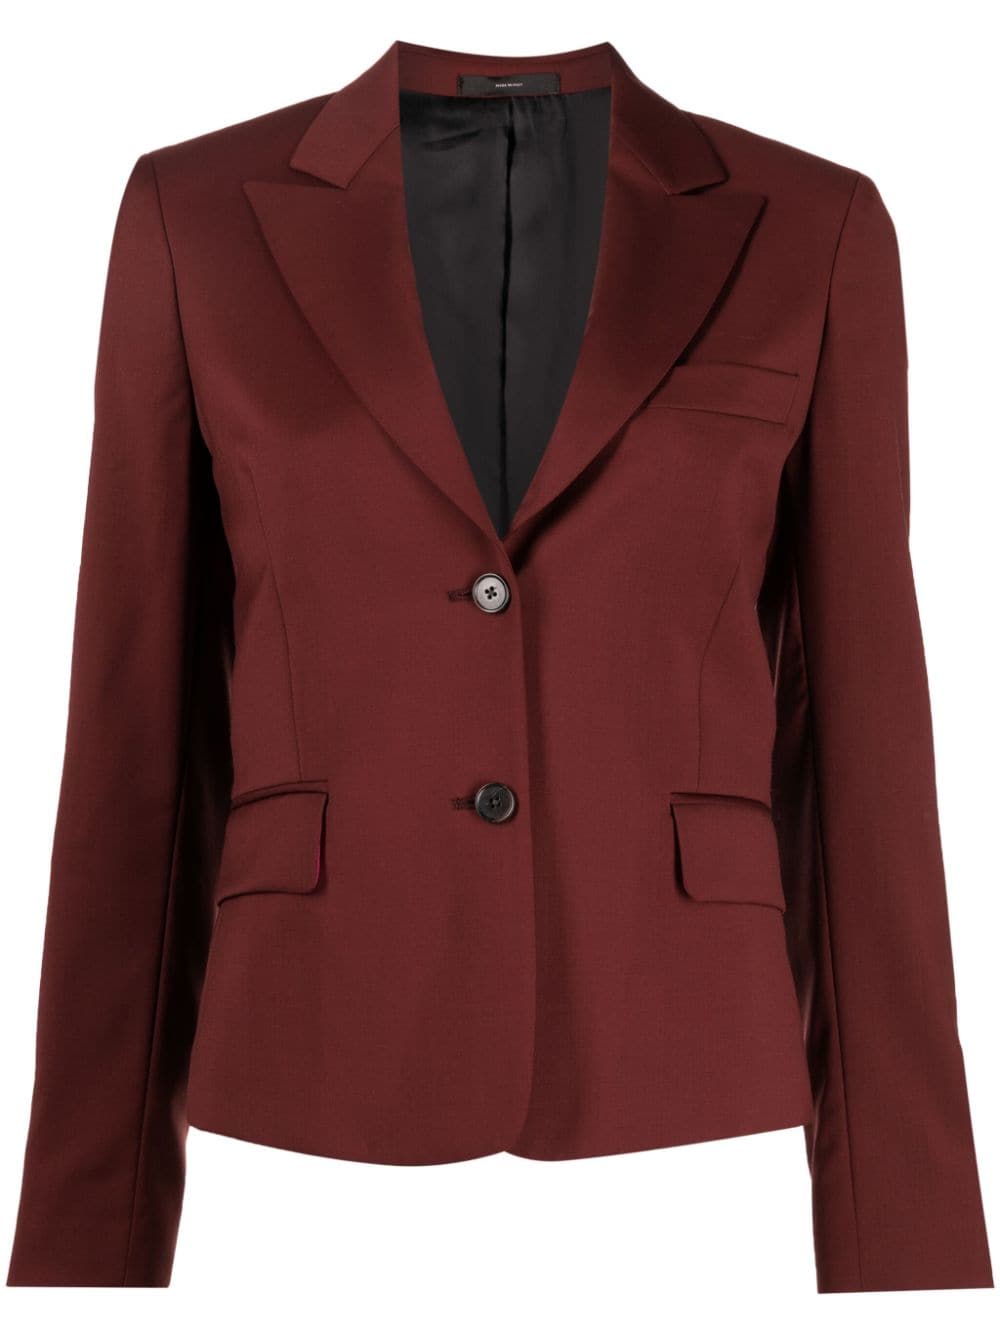 Paul Smith single-breasted wool jacket - Red von Paul Smith